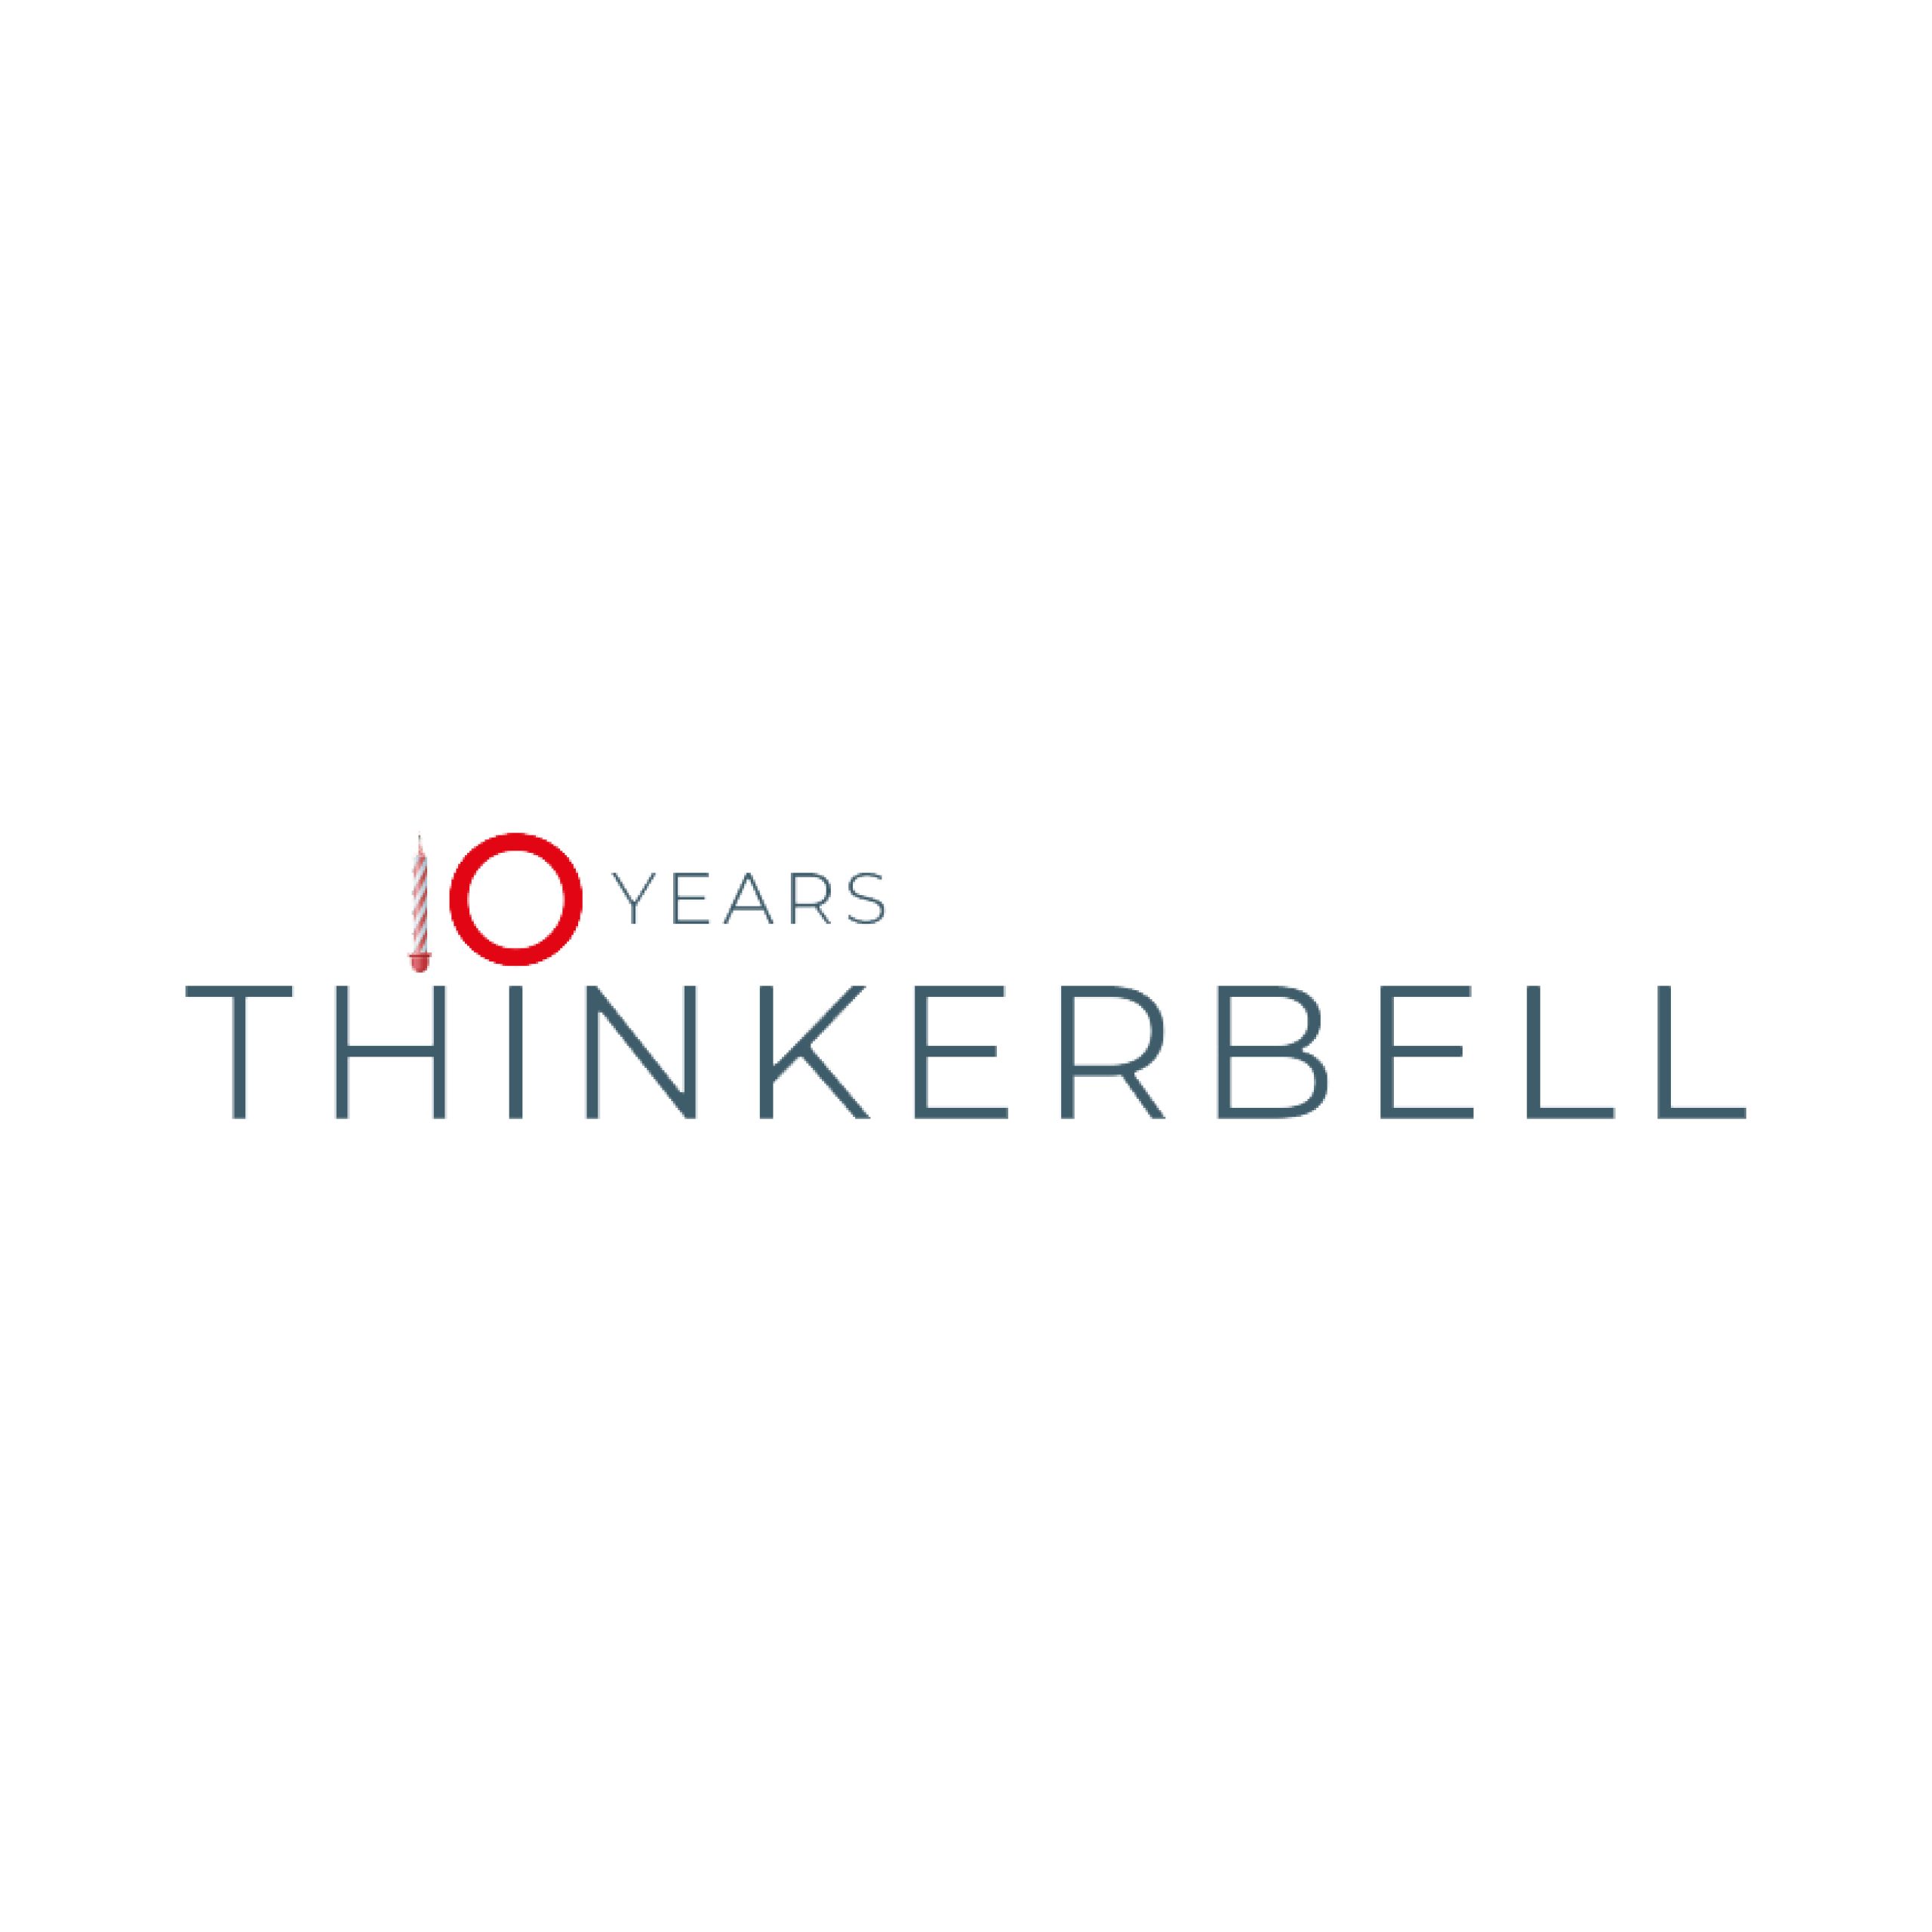 Thinkerbell: 10 years as your trusted POS partner